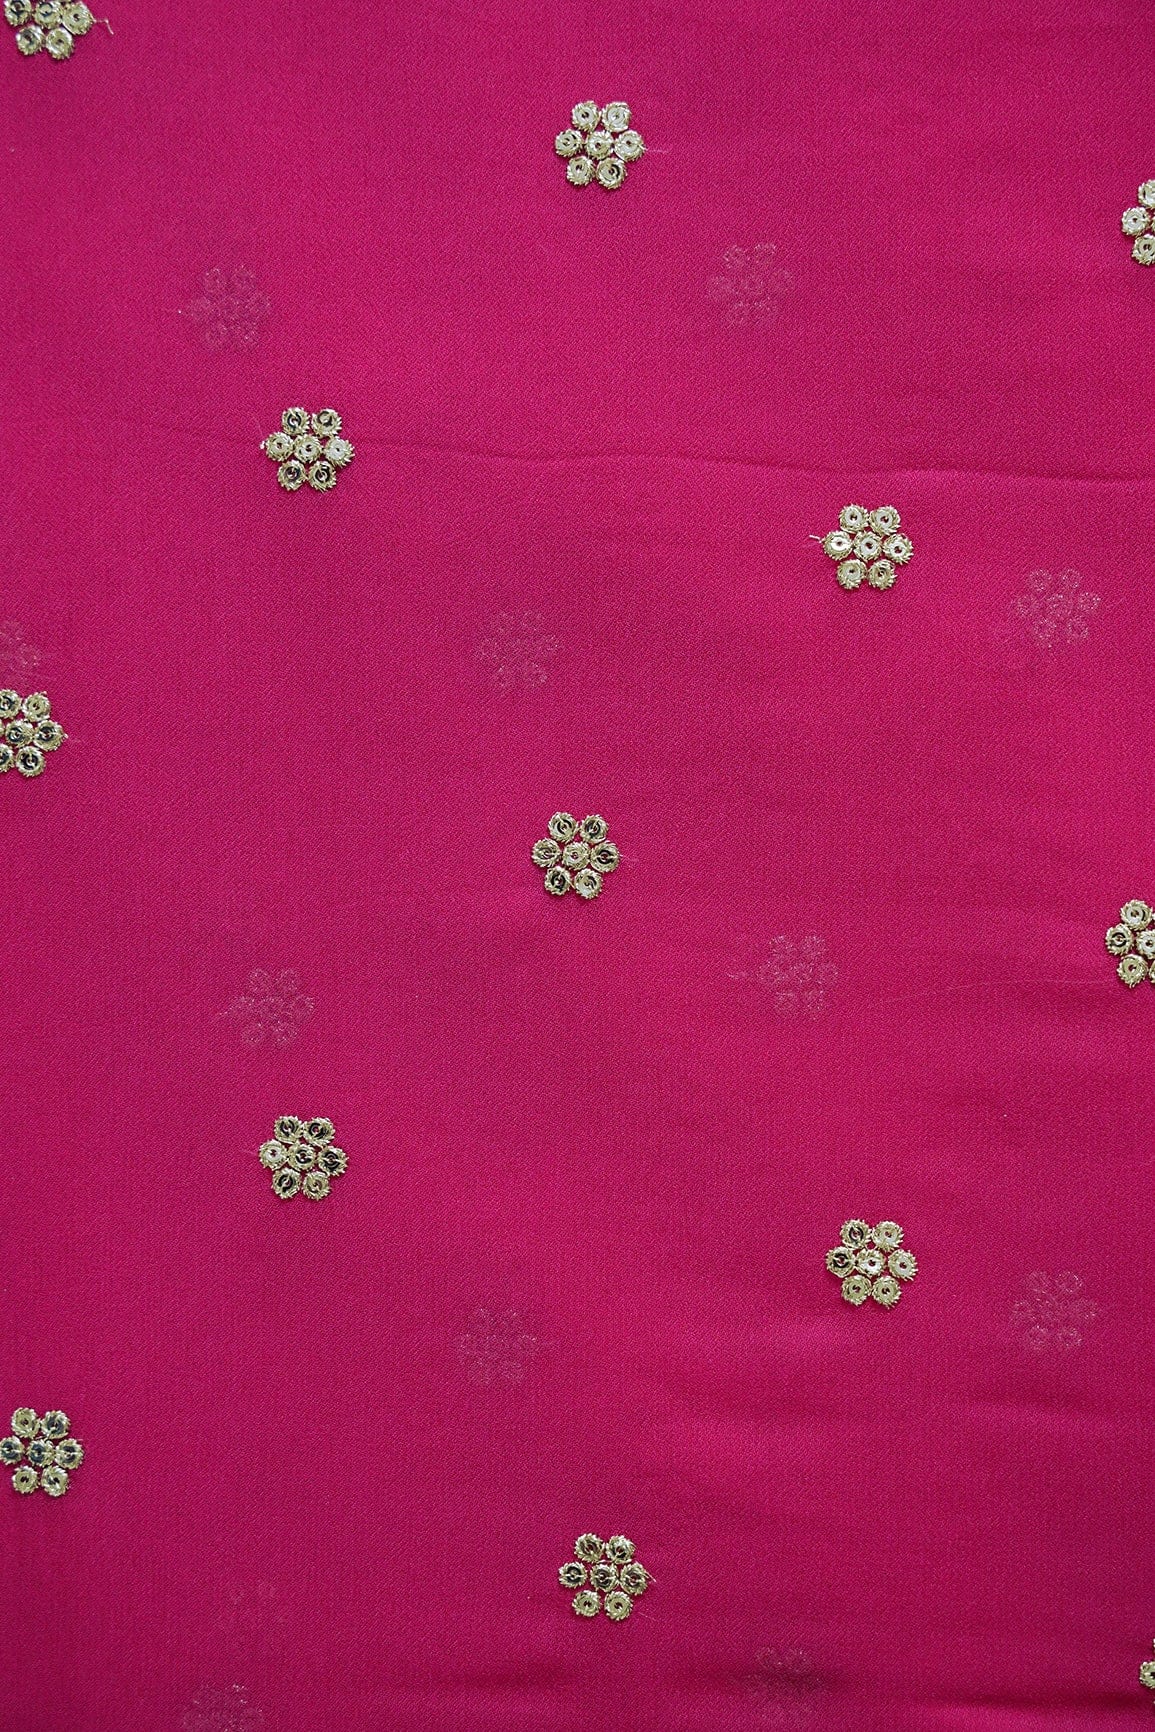 doeraa Embroidery Fabrics Gold Sequins With Gold Zari Small Motif Embroidery Work On Fuchsia Viscose Georgette Fabric